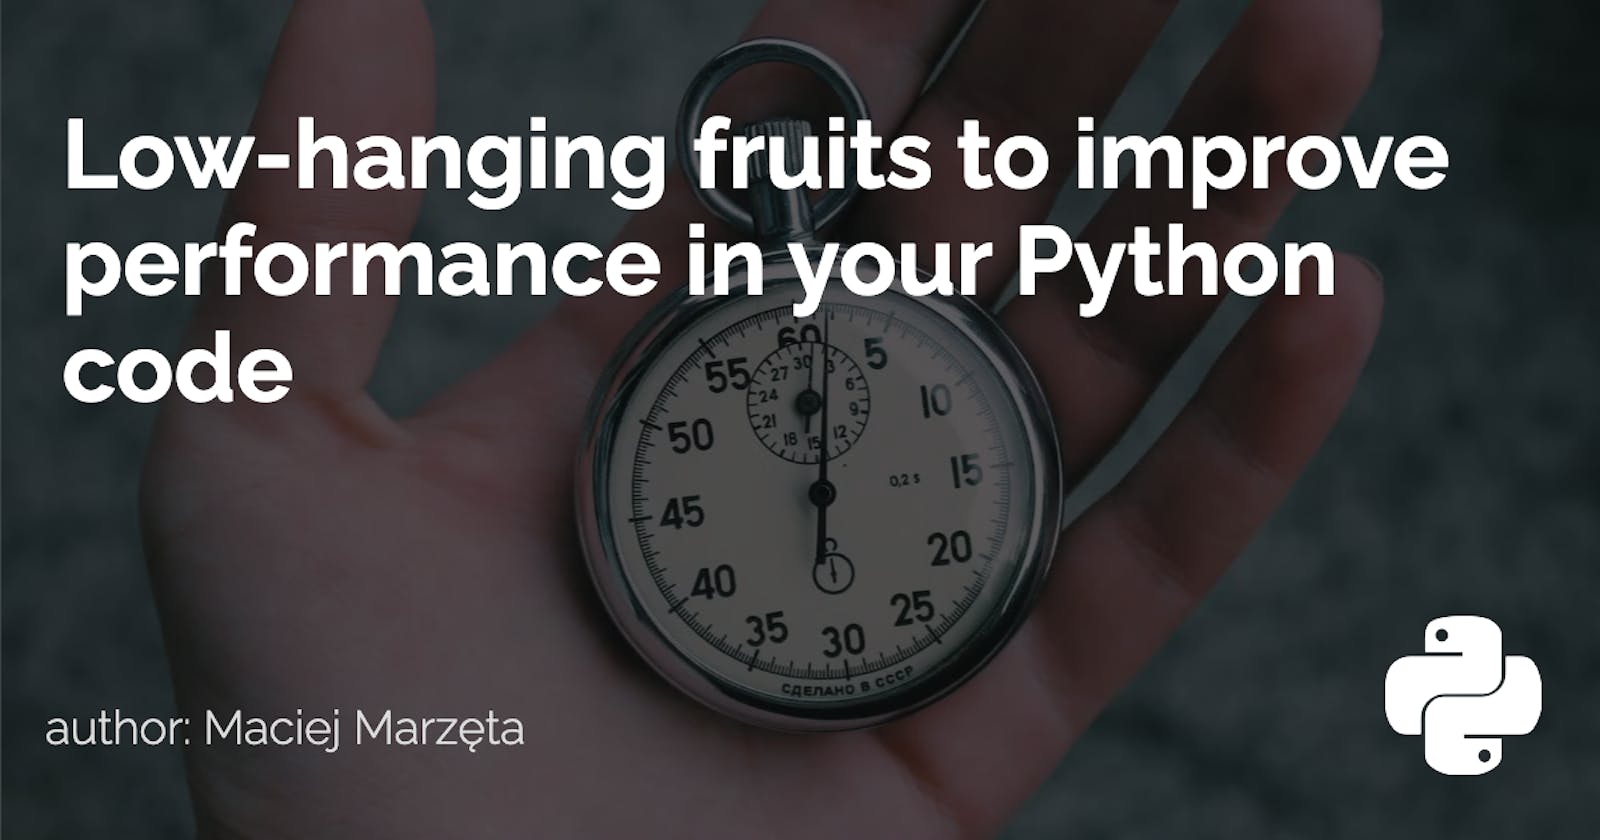 Low-hanging fruits to improve performance in your Python code